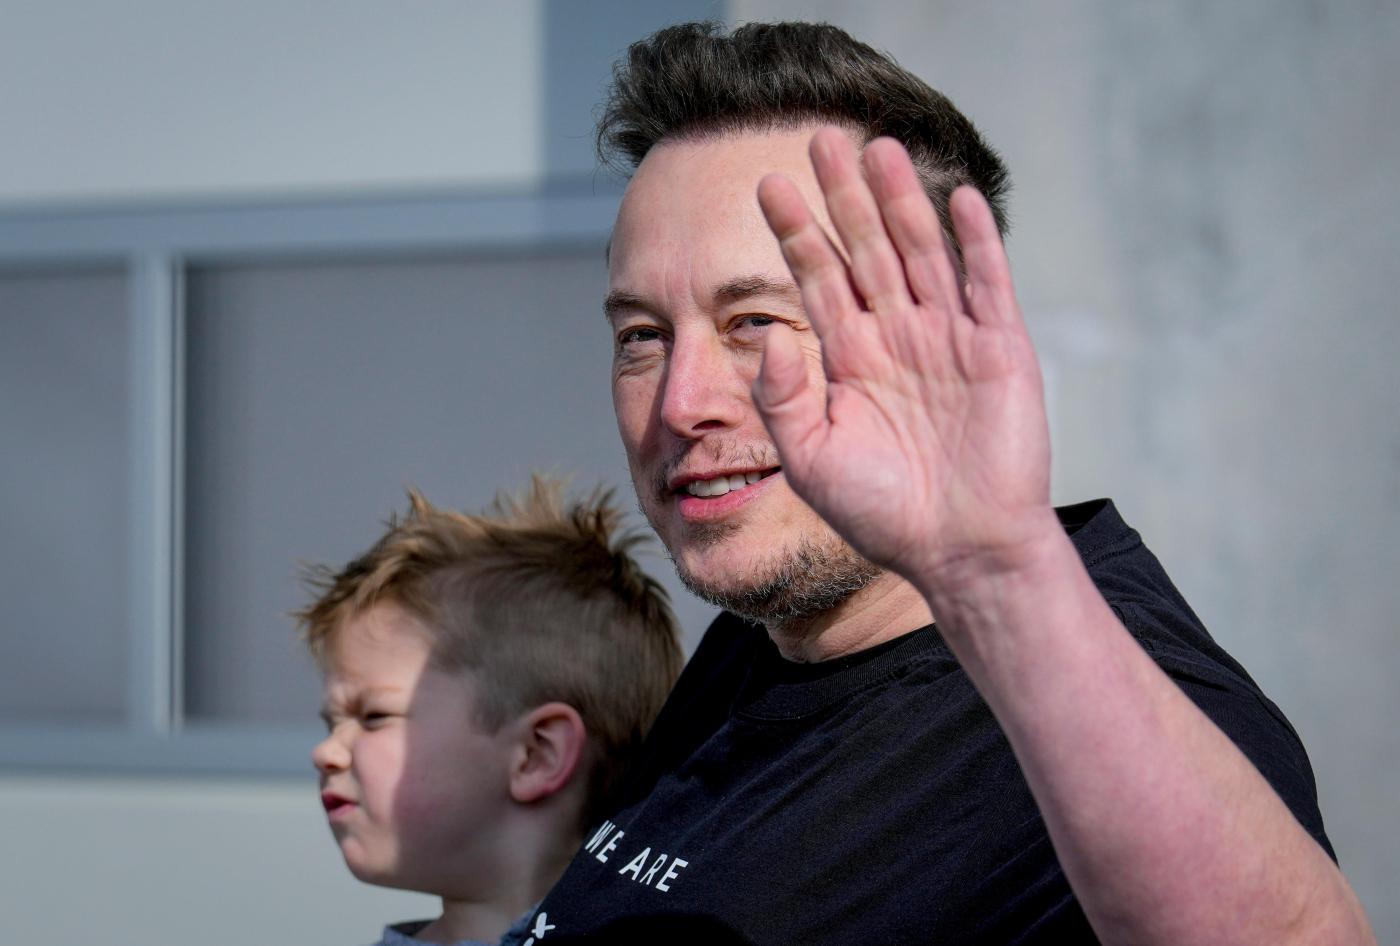 tesla-wants-shareholders-to-reinstate-$56-billion-pay-package-for-musk-rejected-by-delaware-judge